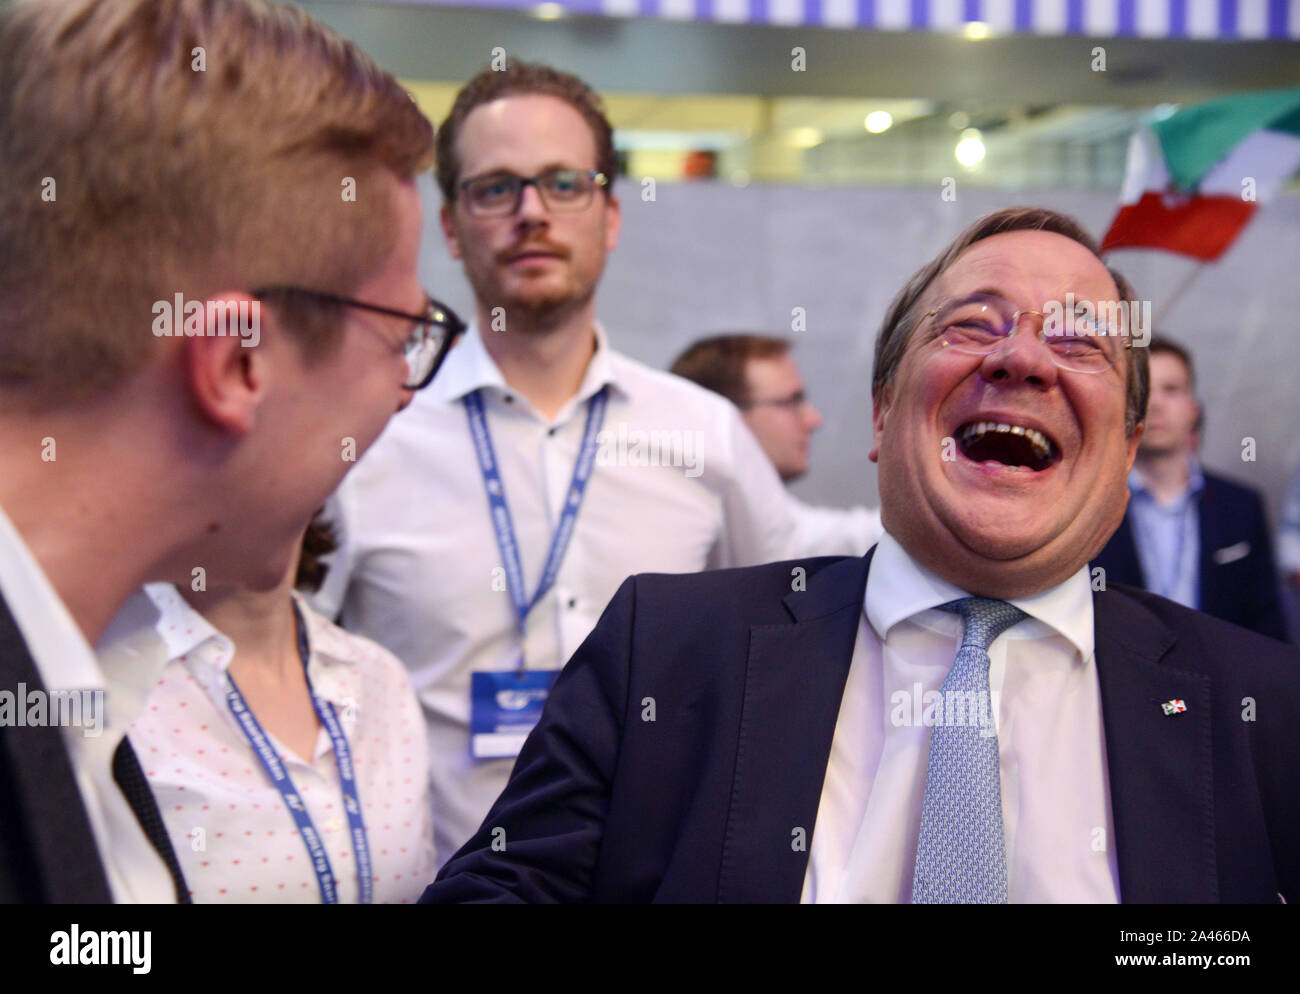 12 October 2019, Saarland, Saarbrücken: Armin Laschet (r, CDU), Prime  Minister of North Rhine-Westphalia, laughs in conversation with Philipp  Amthor (l) at the Germany Day of the Young Union. Laschet did not